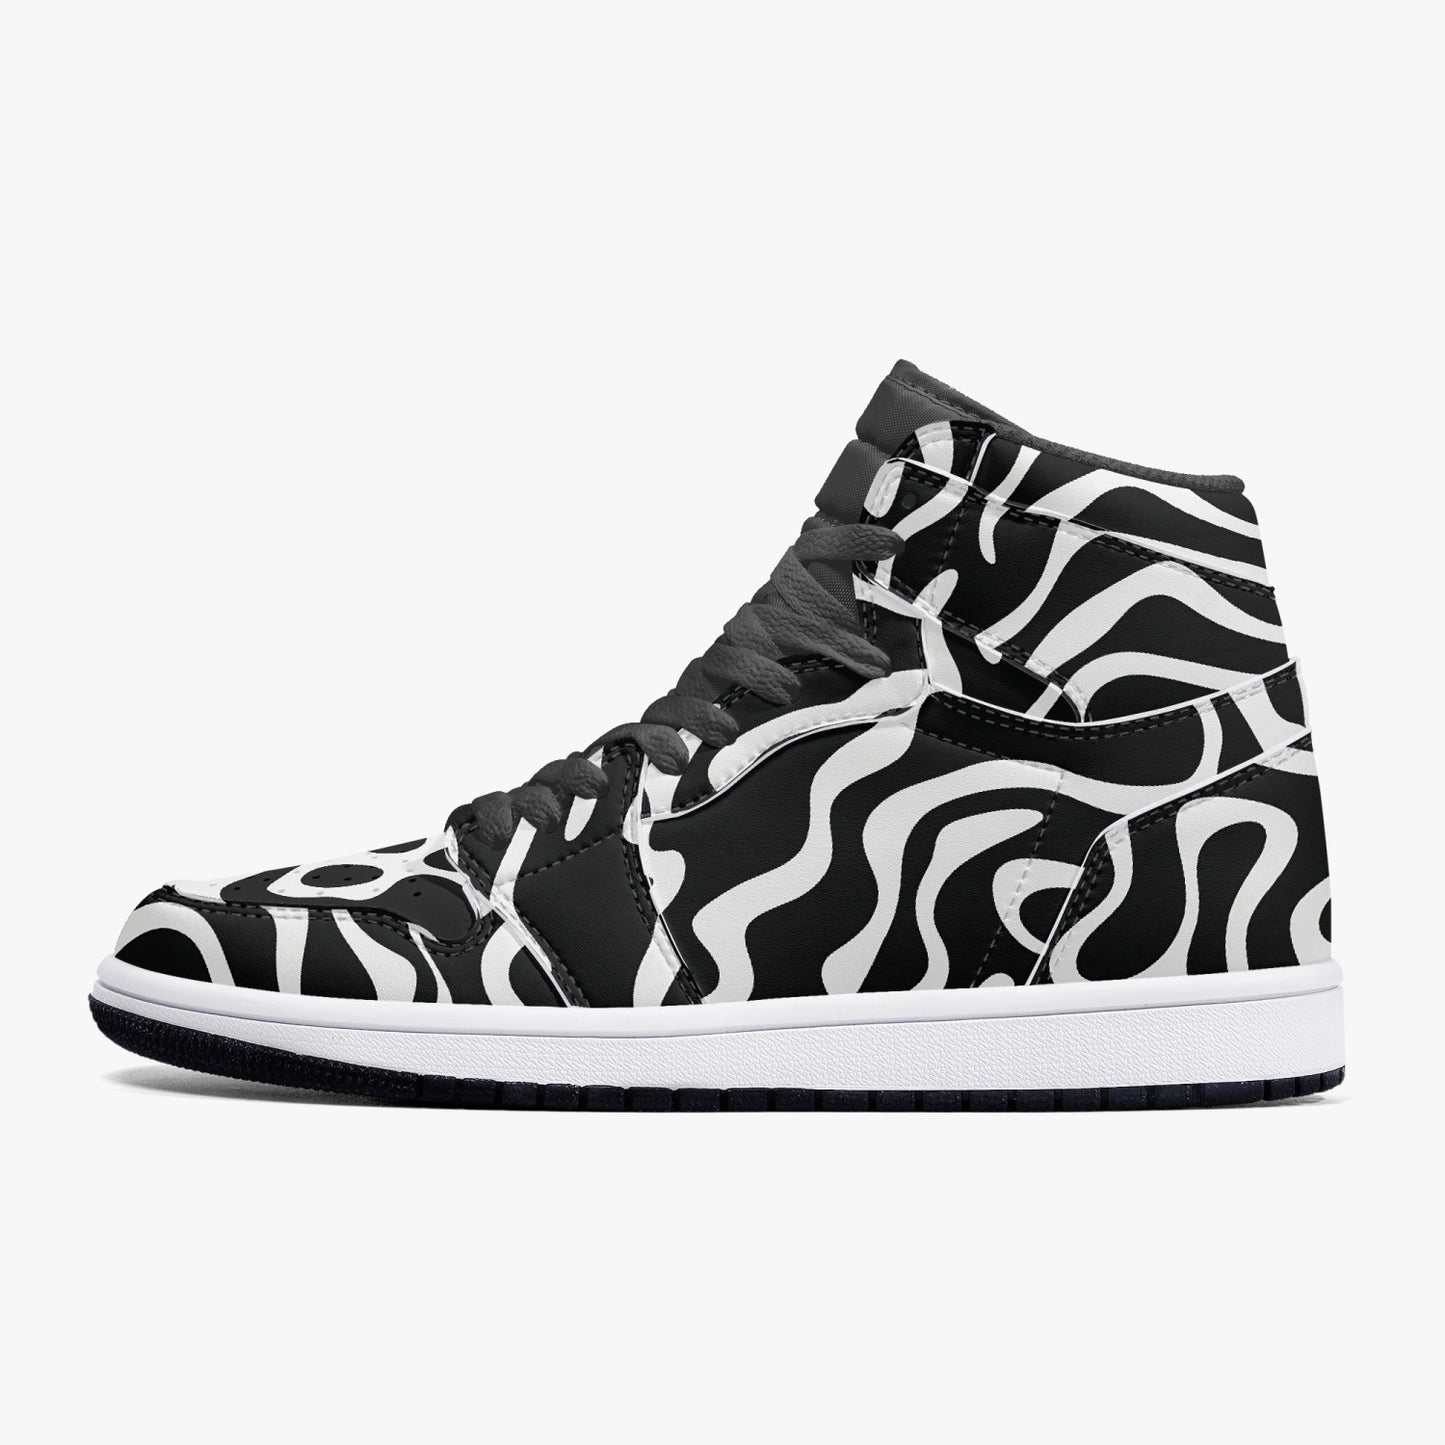 Black White High Top Leather Shoes Sneakers, Men Women Abstract Animal Print Lace Up Footwear Rave Streetwear Designer Gift Kids Starcove Fashion